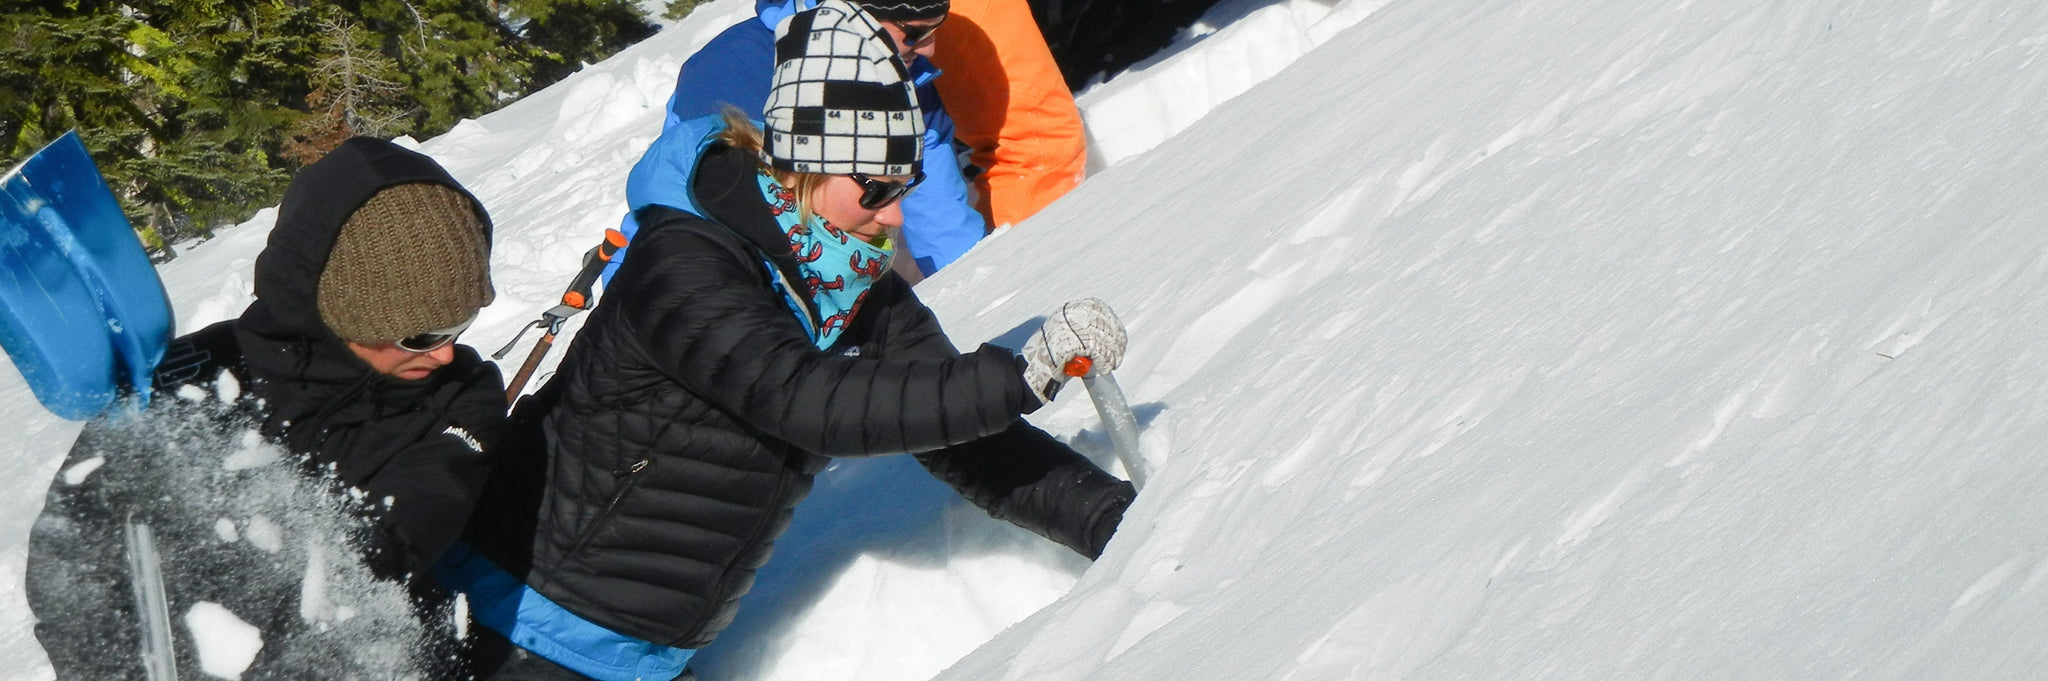 Students prepare a snow pit during an AIARE avalanche course in Truckee, Lake Tahoe, California. Our AMGA and AIARE trained instructors teach the best avalanche courses in truckee!